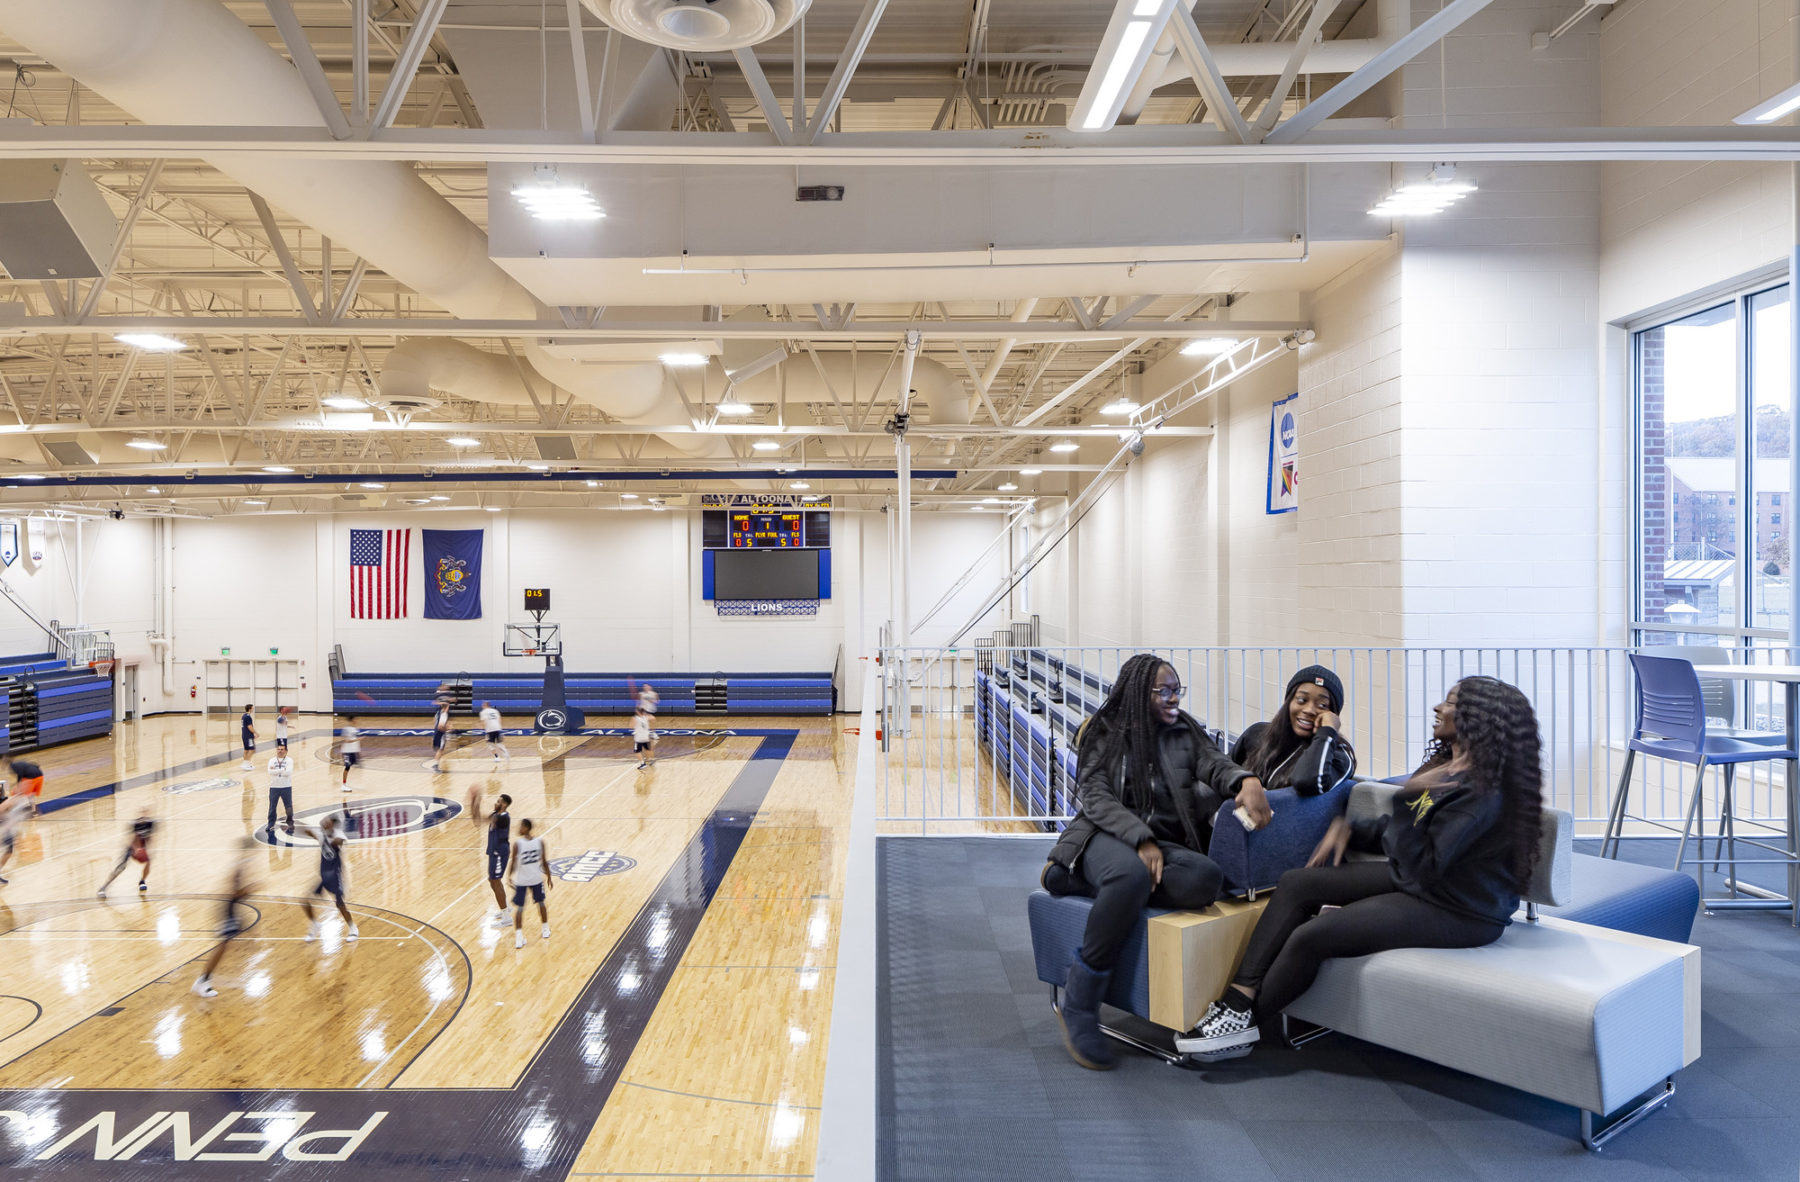 upper level in basketball gymnasium with seating area